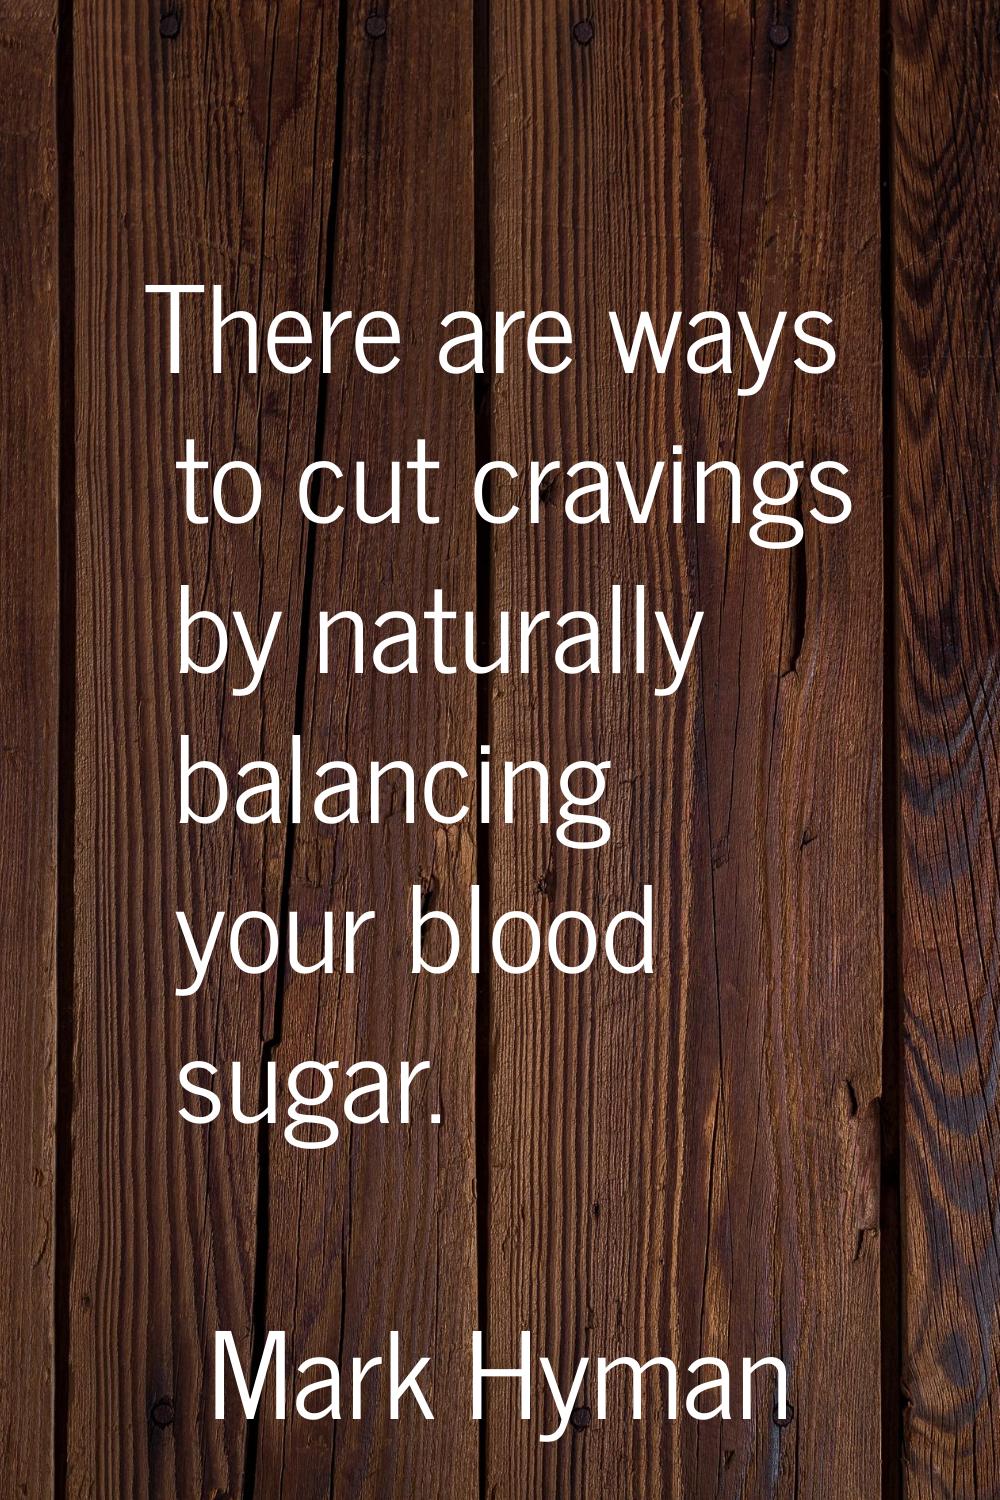 There are ways to cut cravings by naturally balancing your blood sugar.